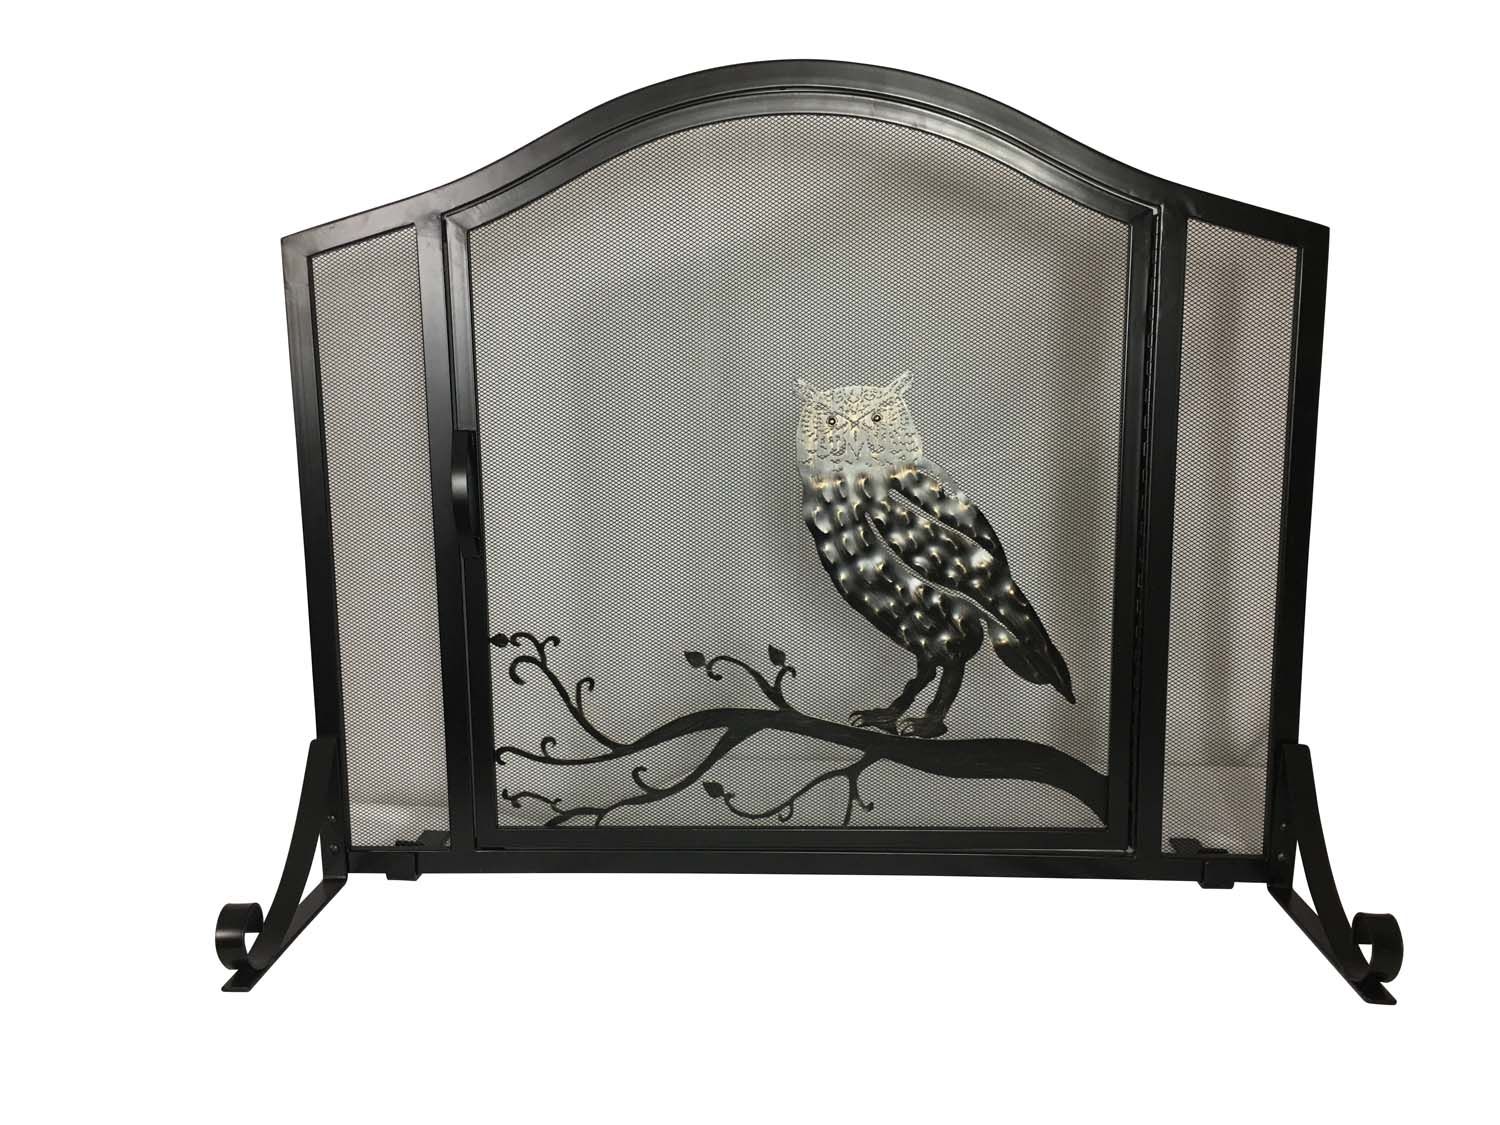 Dagan Industries 38" x 31" Black Wrought Iron Arched With Hand Brushed Bronze Owl Design Fireplace Screen